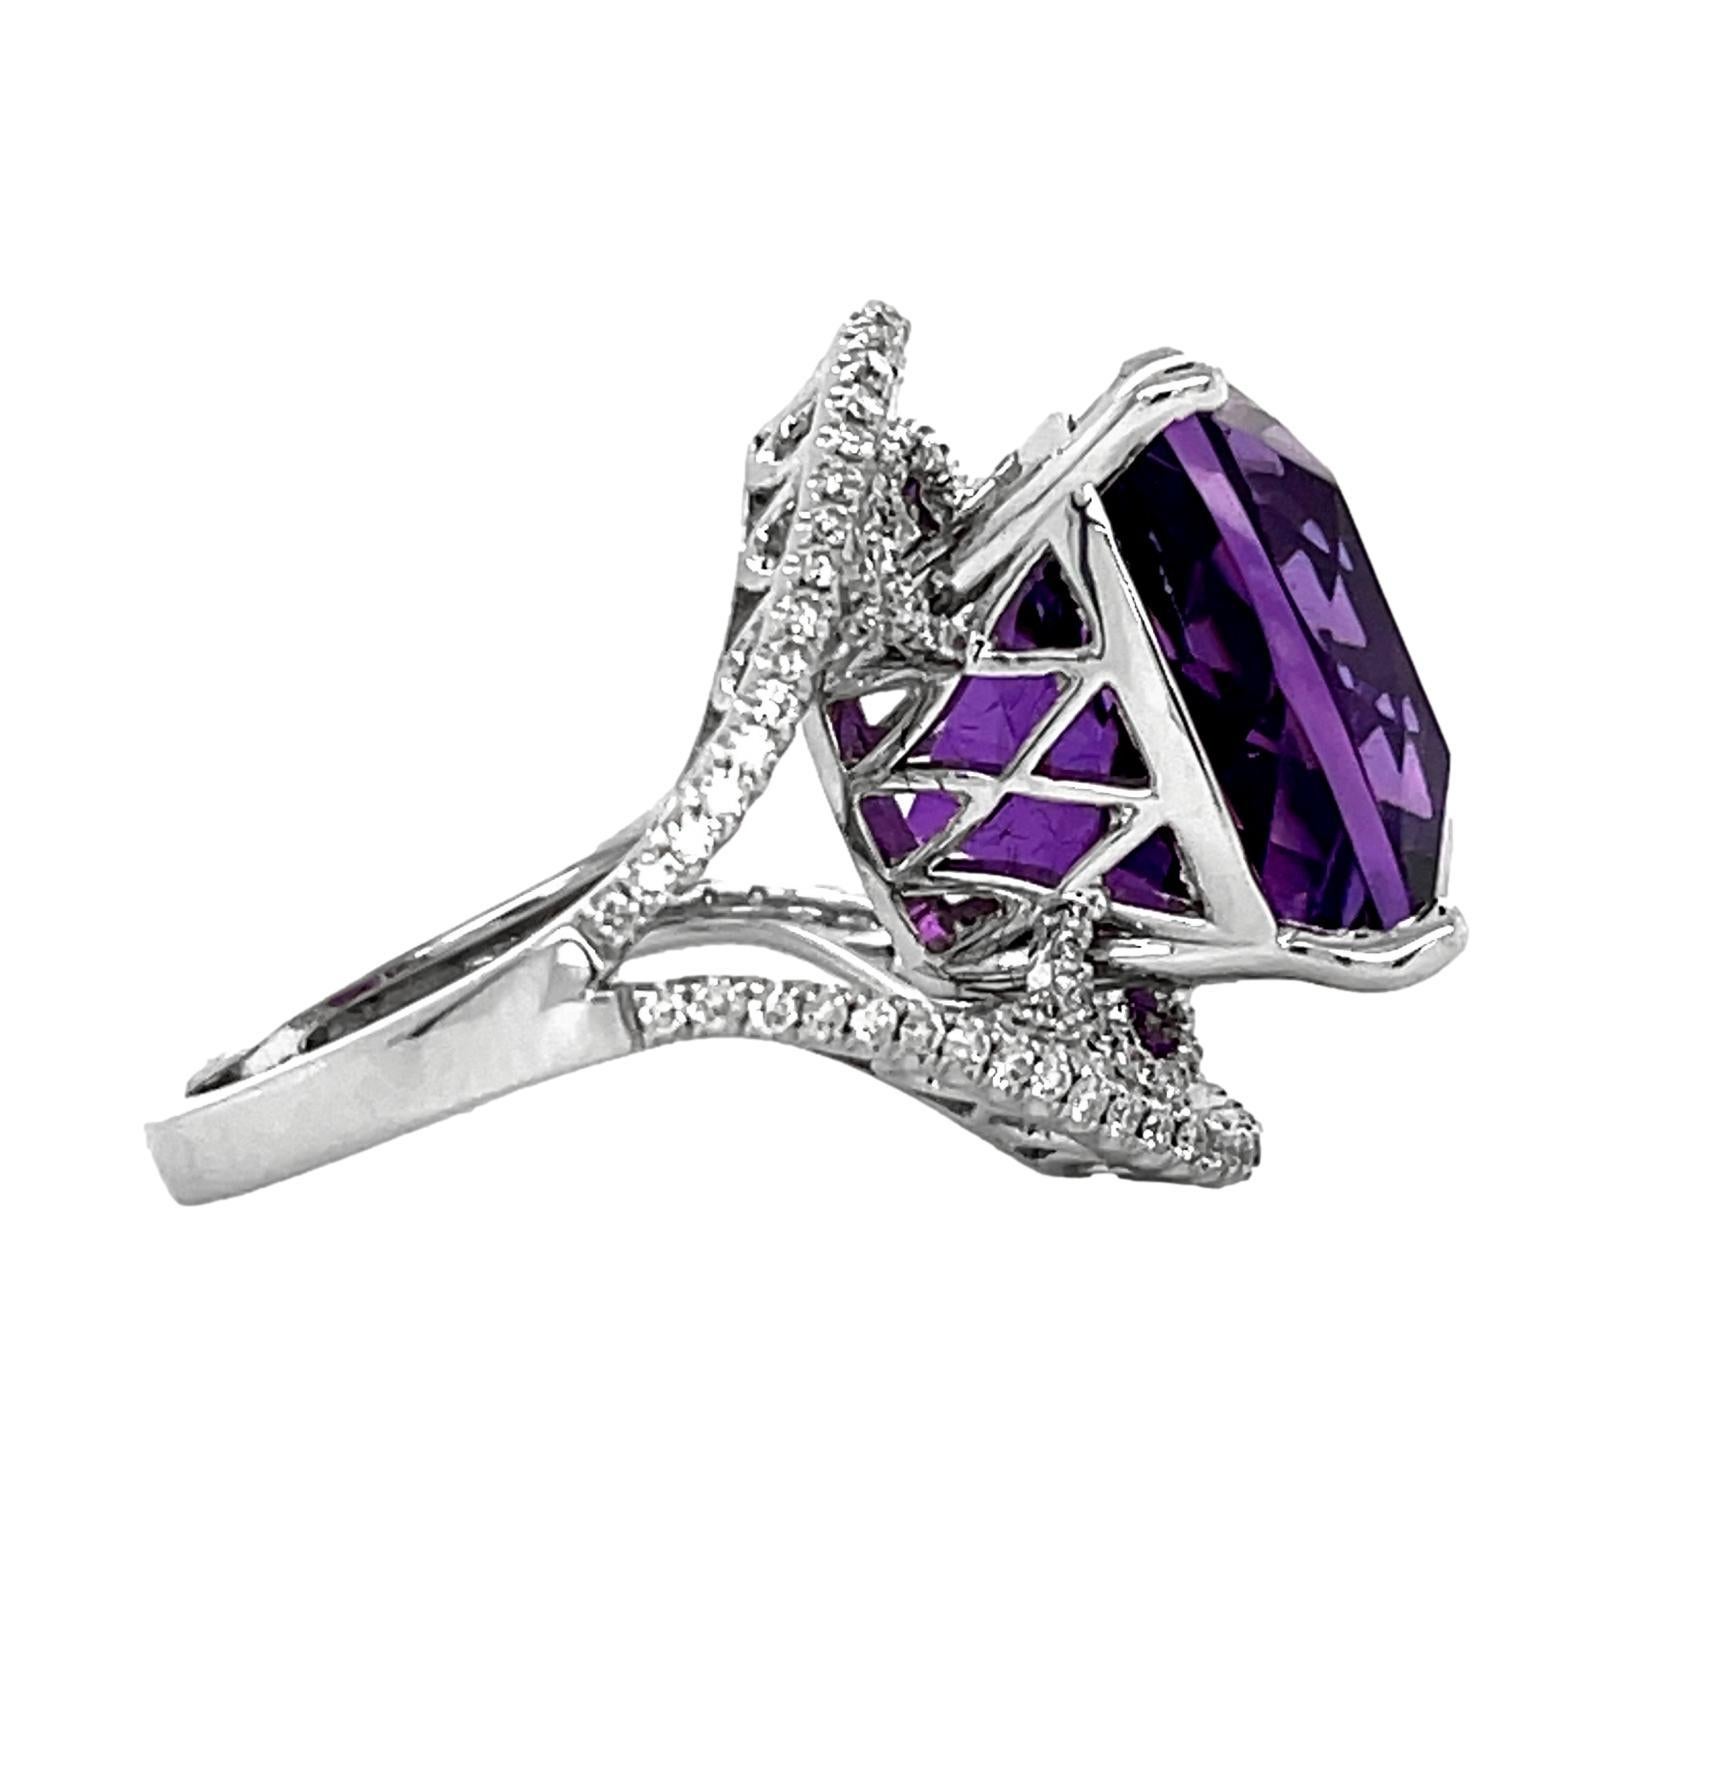 This stunning Statement ring has a cushion 15x15mm AAA quality African Amethyst with 4 prong setting in 14 karat white gold. There are 108 shimmering brilliant cut round diamonds on the shank. This beautiful ring will be the talk of your special